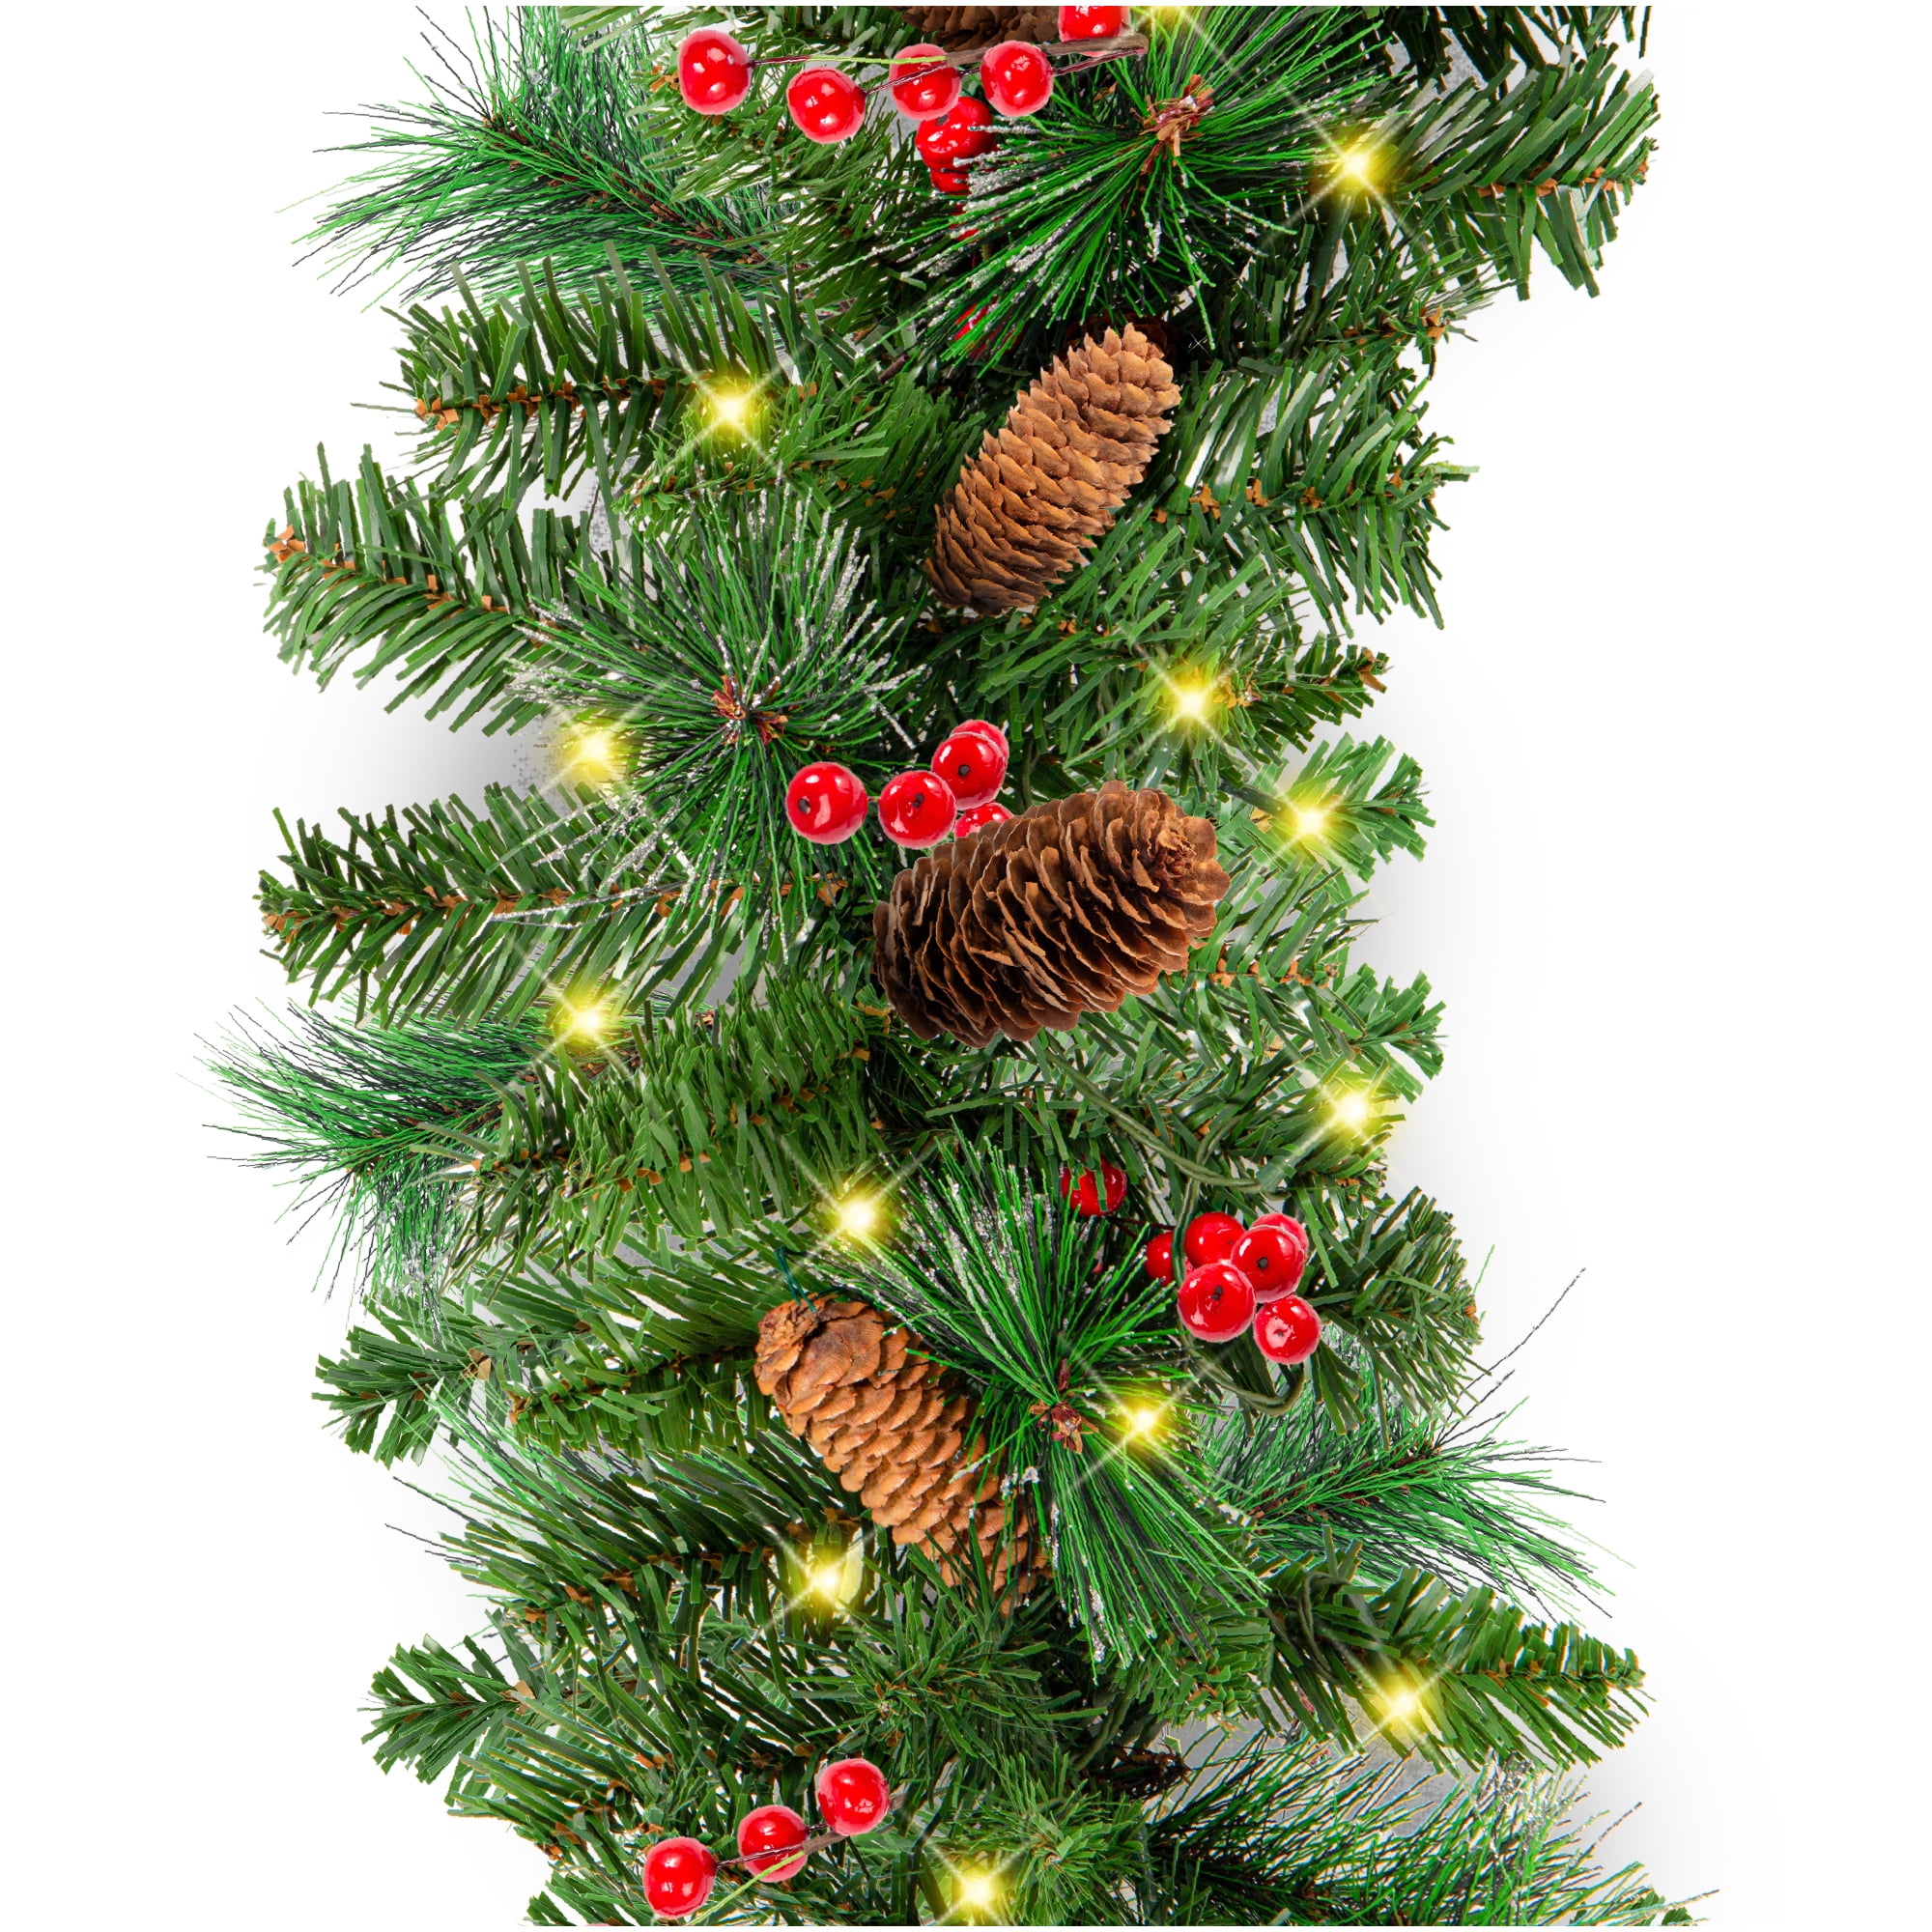 Details about   20 Foot Natural Look Pine Garland With 100 Multicolor Christmas Lights Holiday 